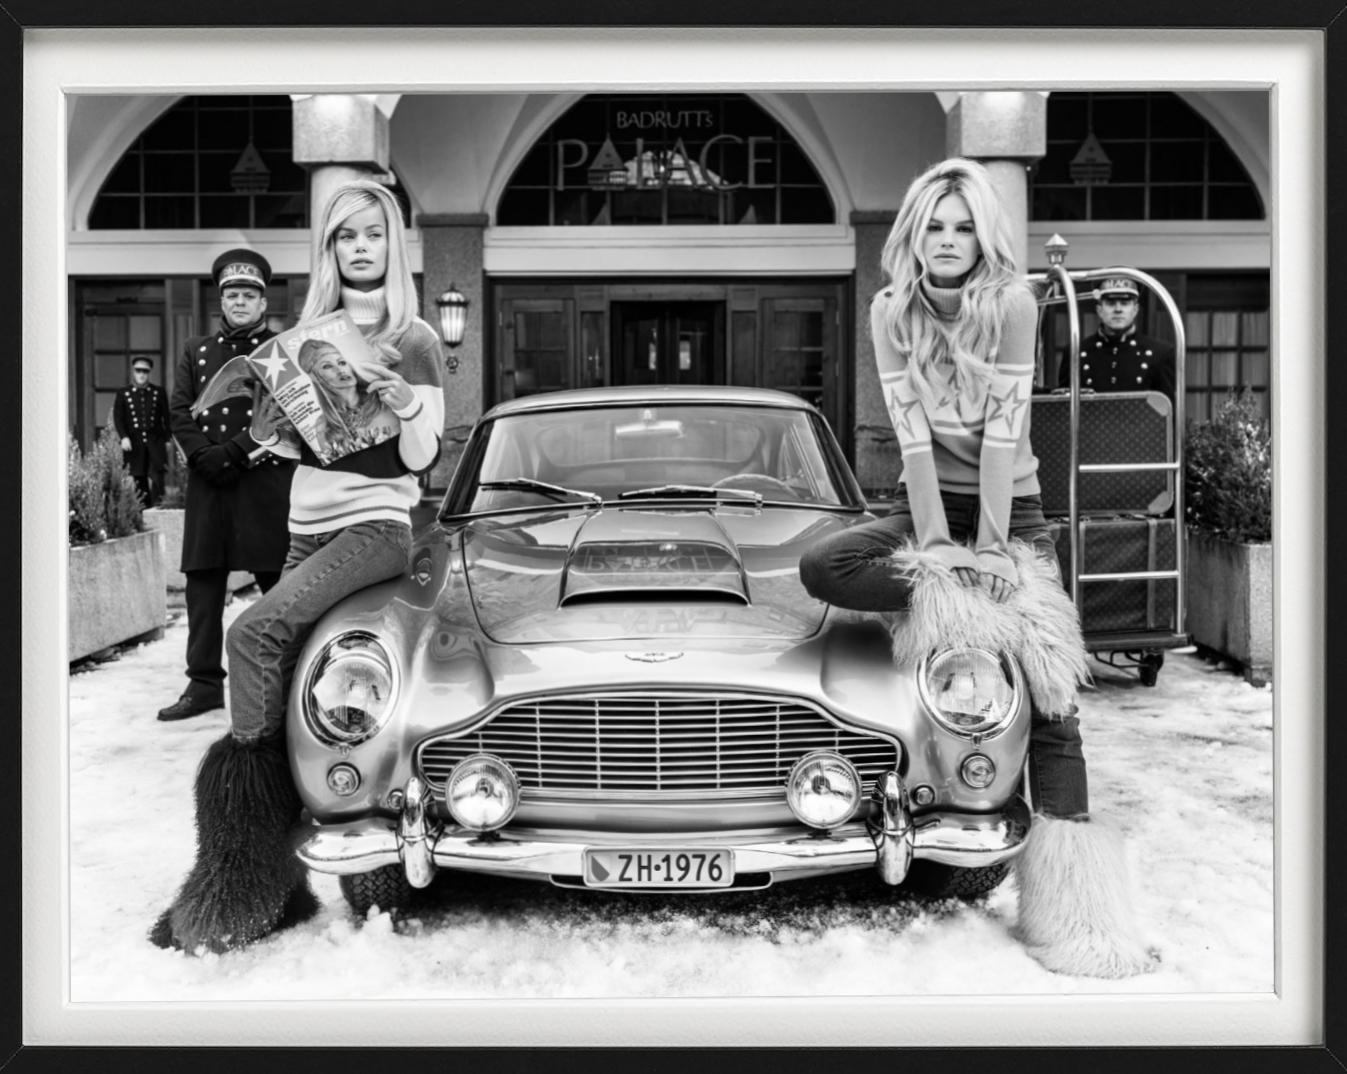 Badrutt's - b&w photograph of two models posing next to a car in St. Moritz  - Photograph by David Yarrow